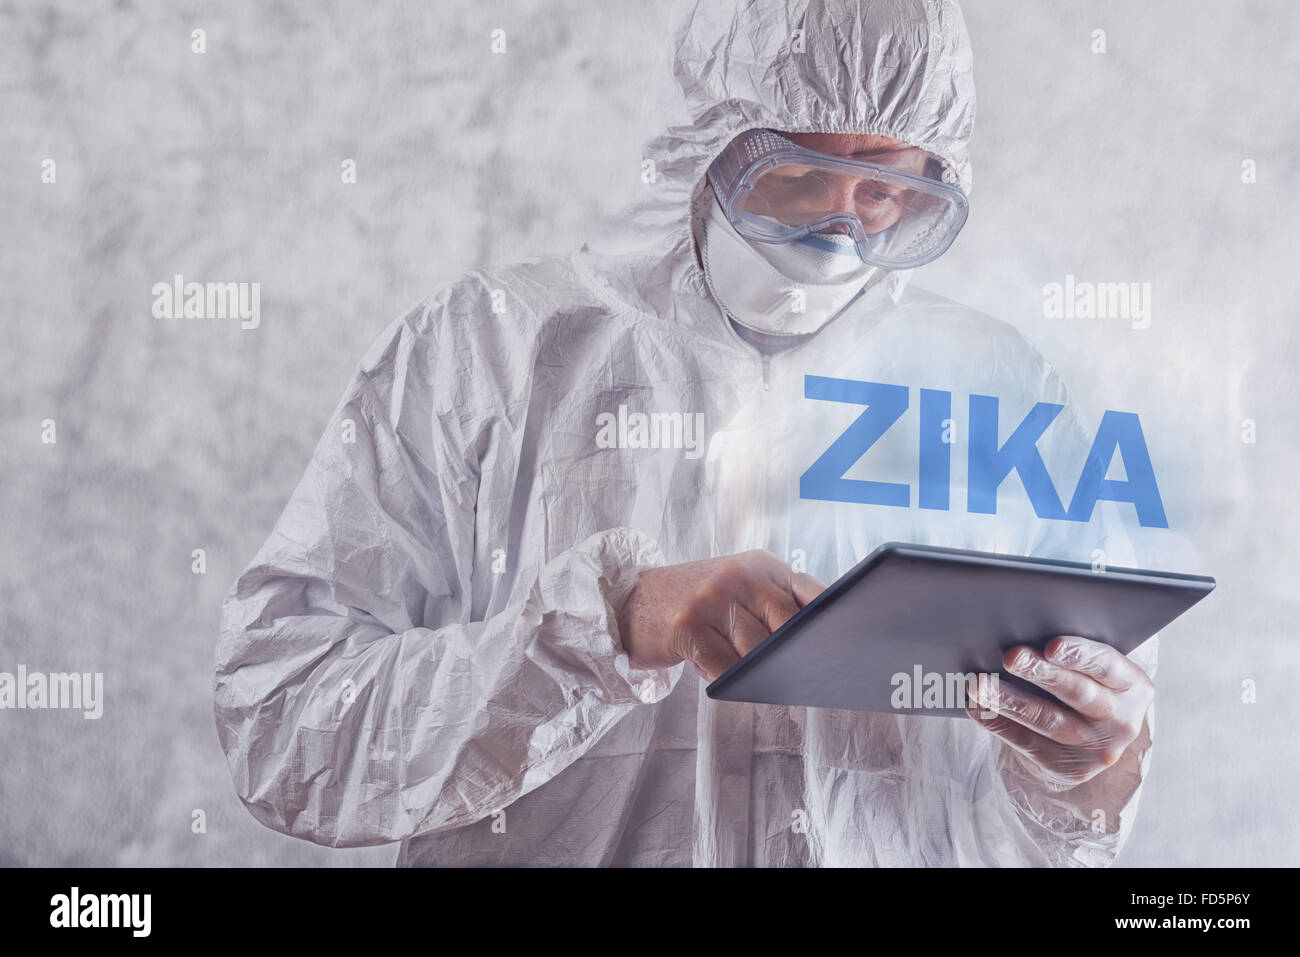 Zika virus concept, medical worker in protective clothes using digital tablet computer to access internet Stock Photo